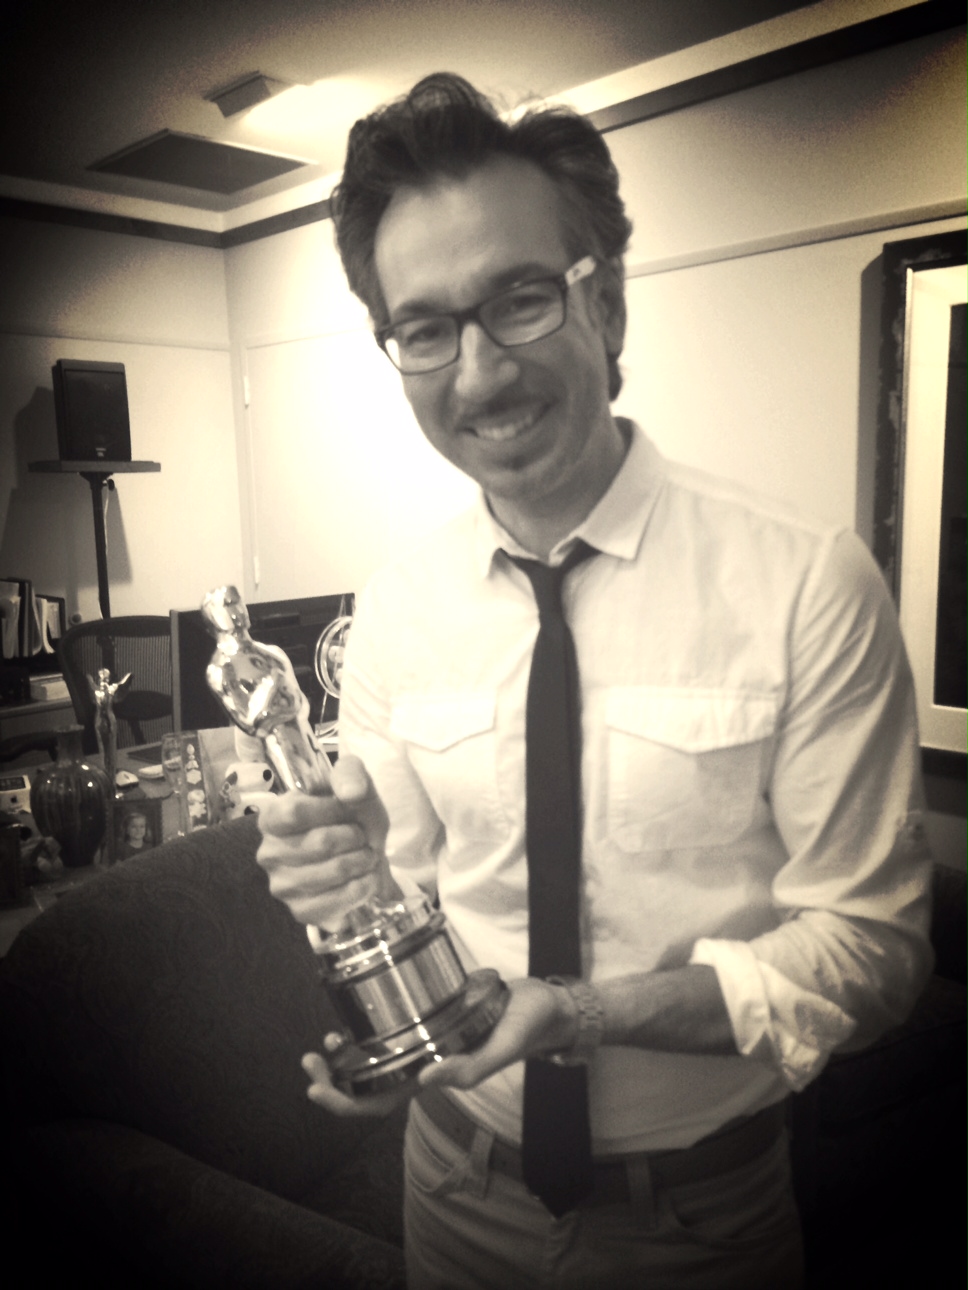 Lino DiSalvo, Head of Animation, Oscar win for Best Animated Feature Film FROZEN.